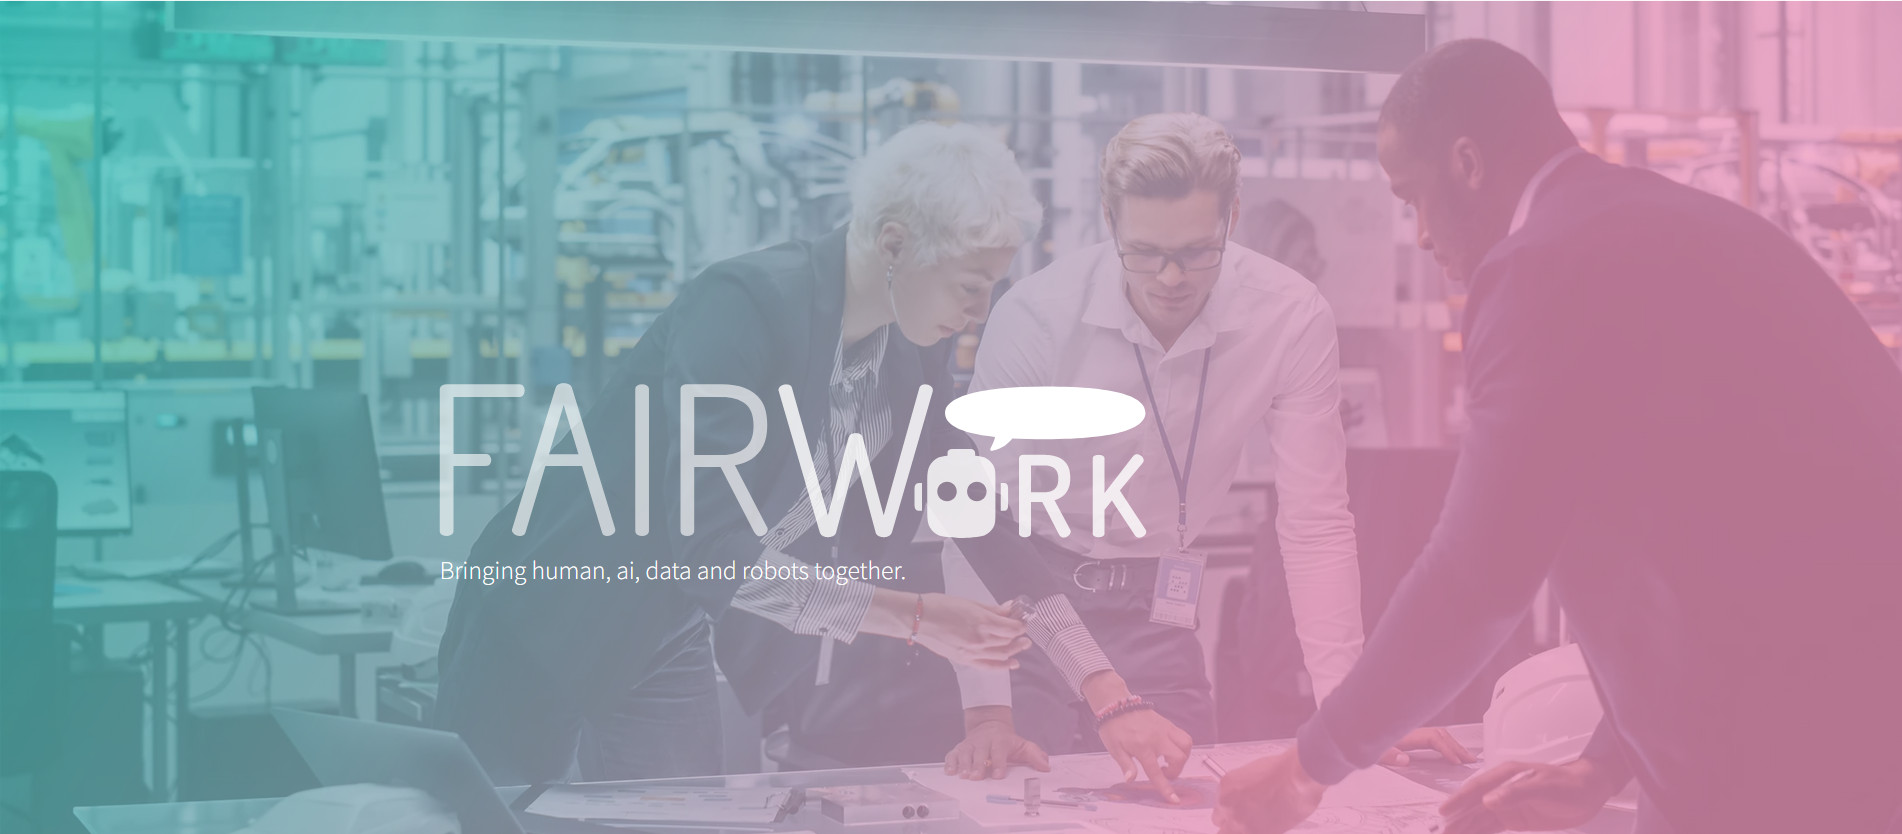 Digital twin context in FAIRWork use cases